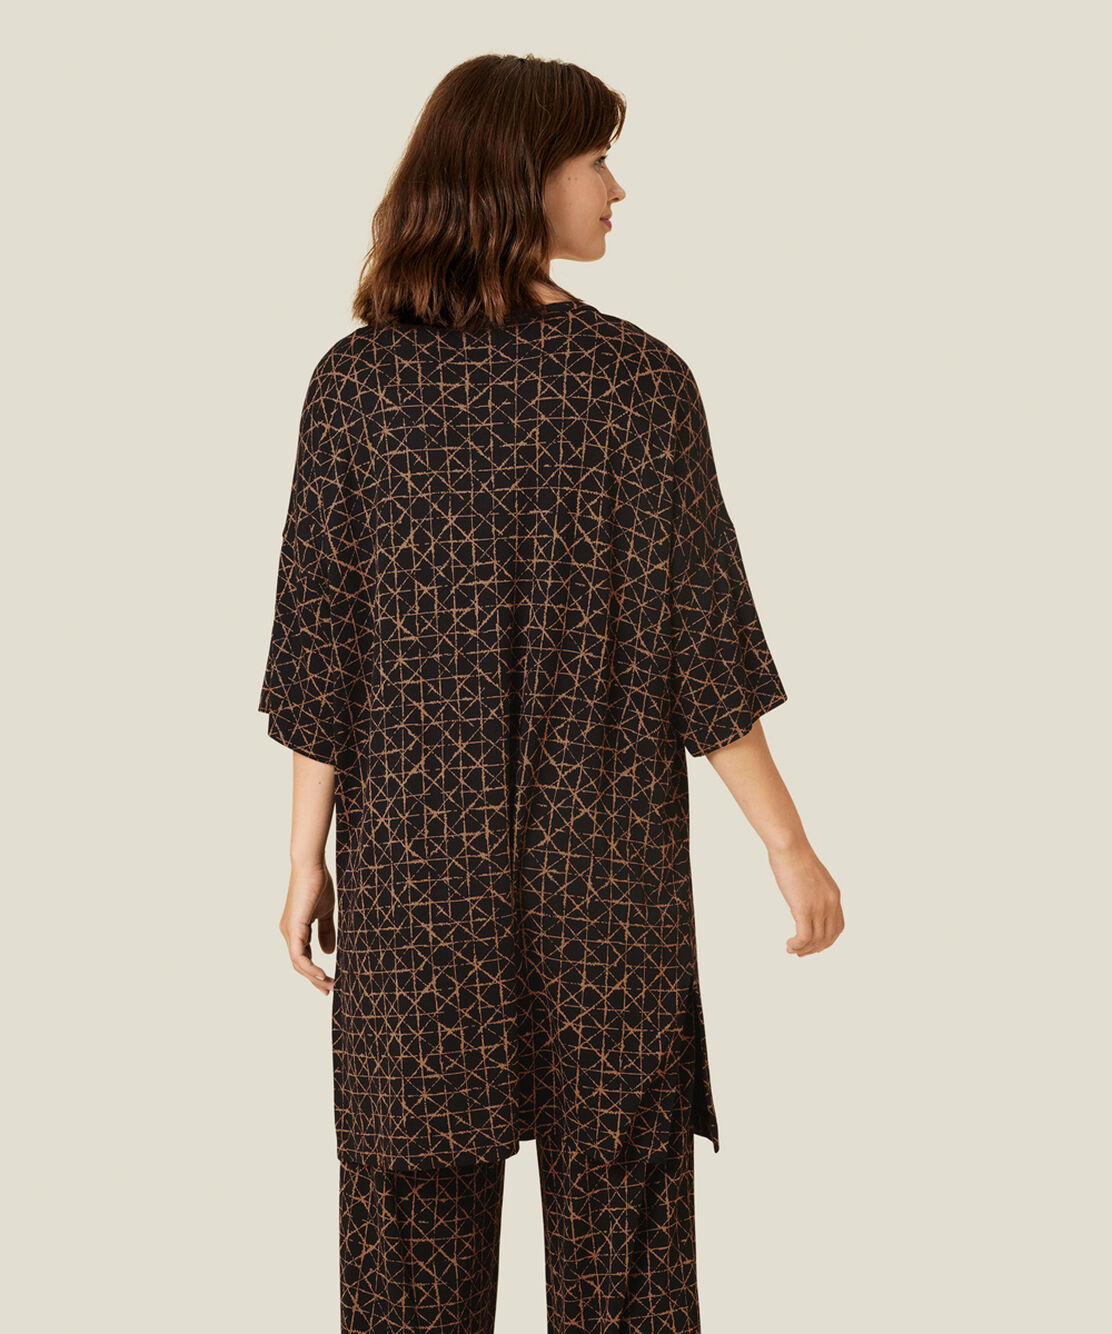 GRY JERSEY TUNIC, Tobacco Brown, hi-res